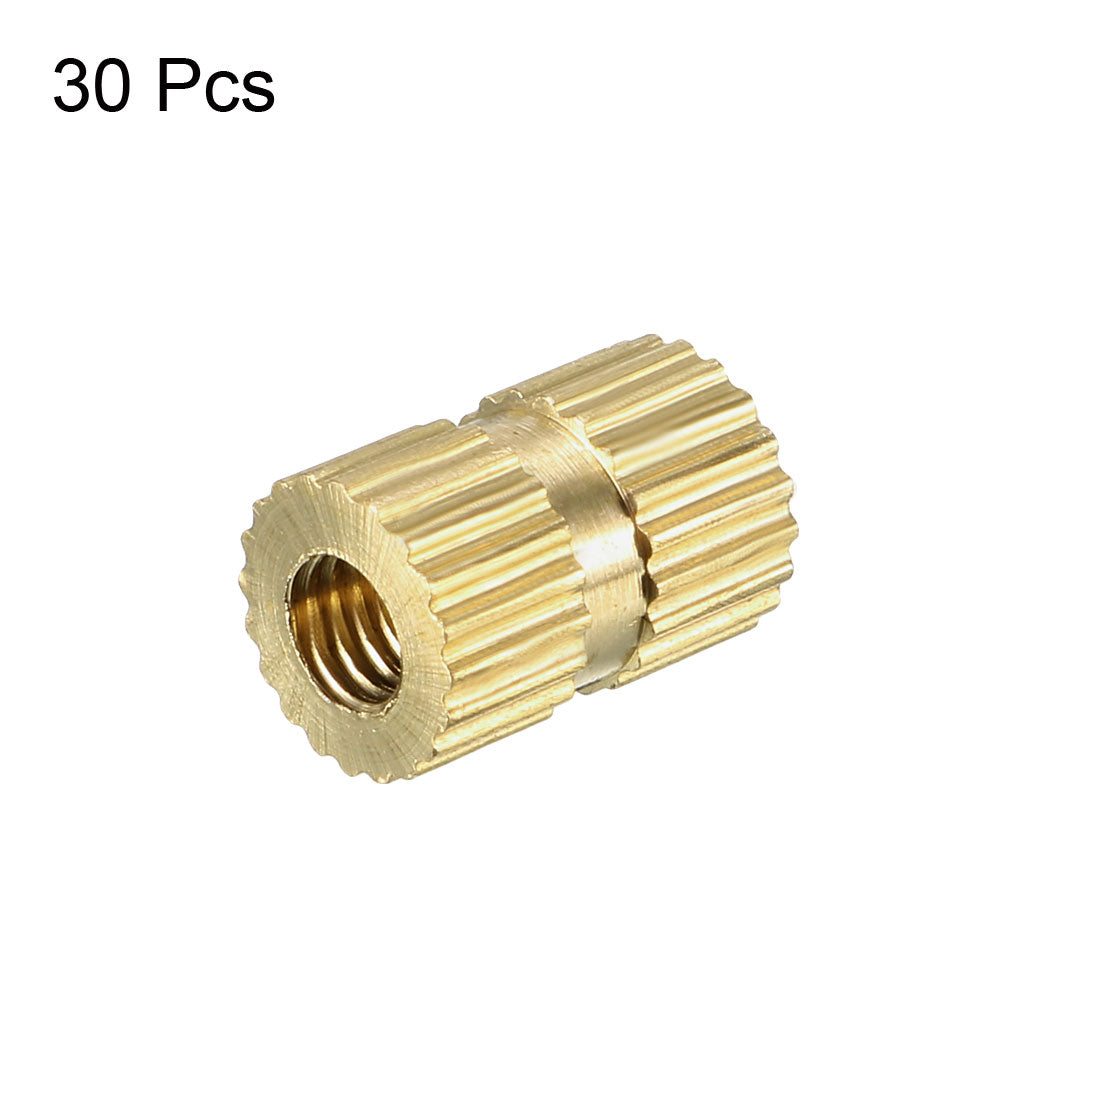 uxcell Uxcell Knurled Insert Nuts - Female Thread Brass Threaded Insert Embedment Nut for 3D Printer